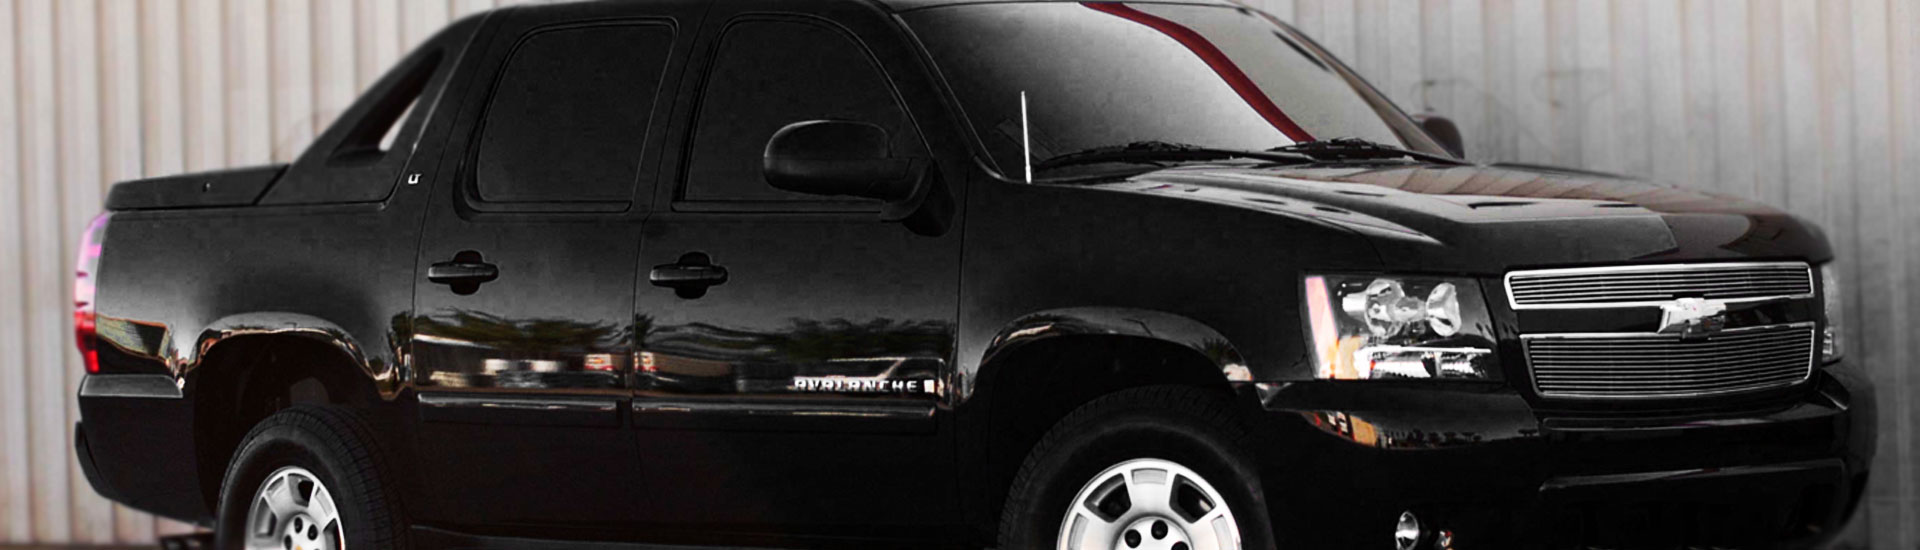 TINTGIANT PRECUT FRONT DOORS WINDOW TINT FOR CHEVY AVALANCHE 07-13 